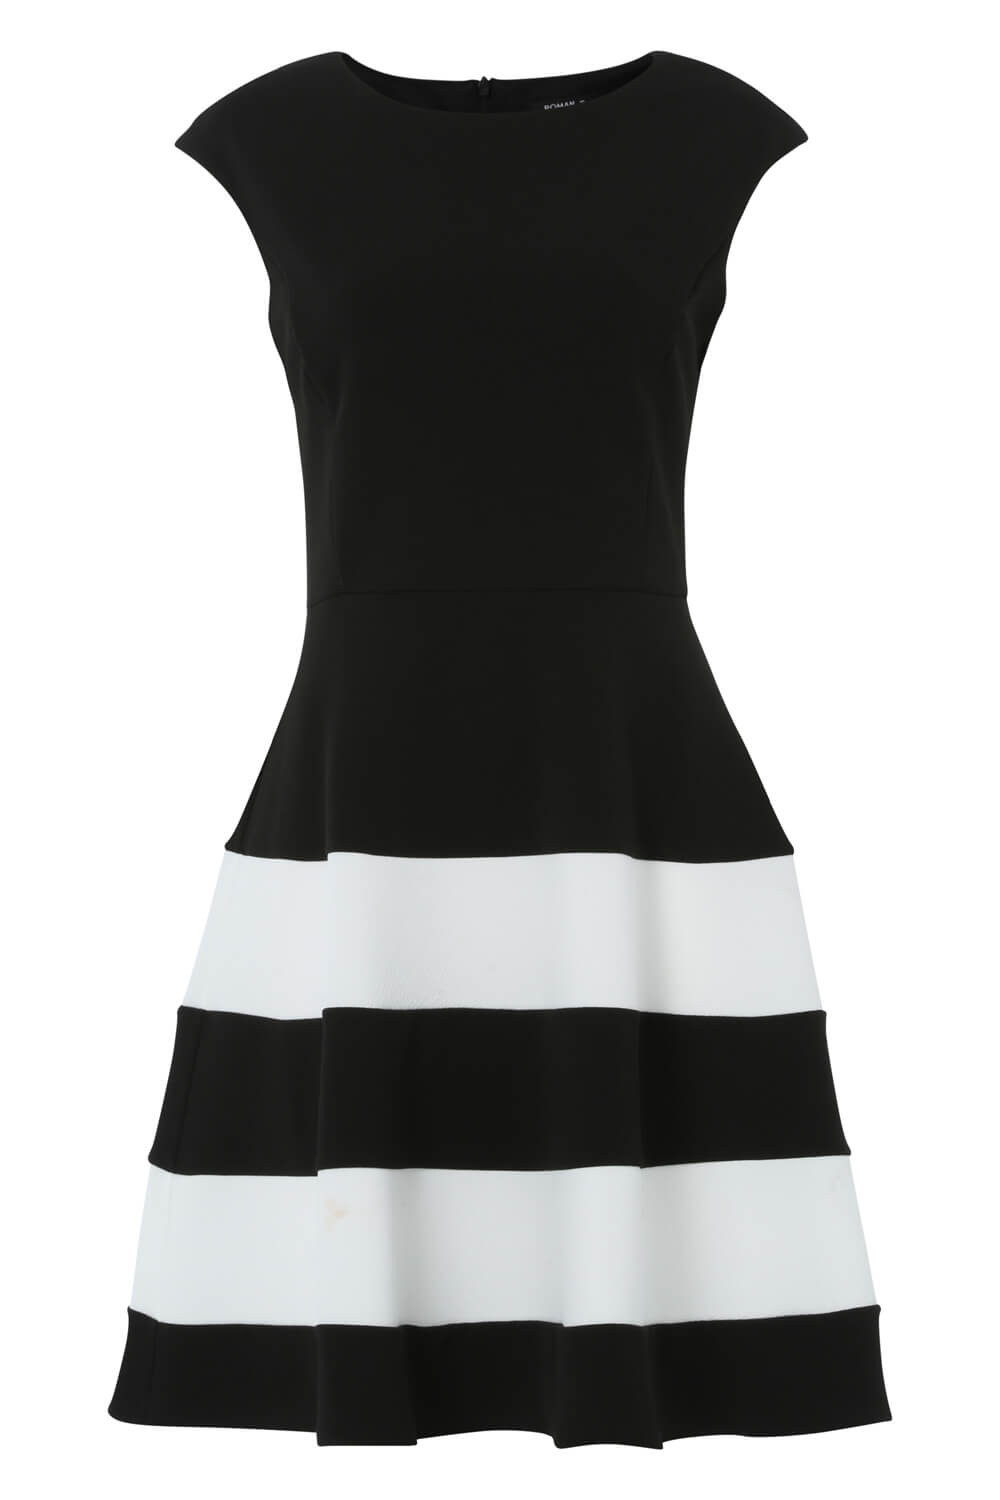 Black Colour Block Fit And Flare Dress, Image 4 of 4